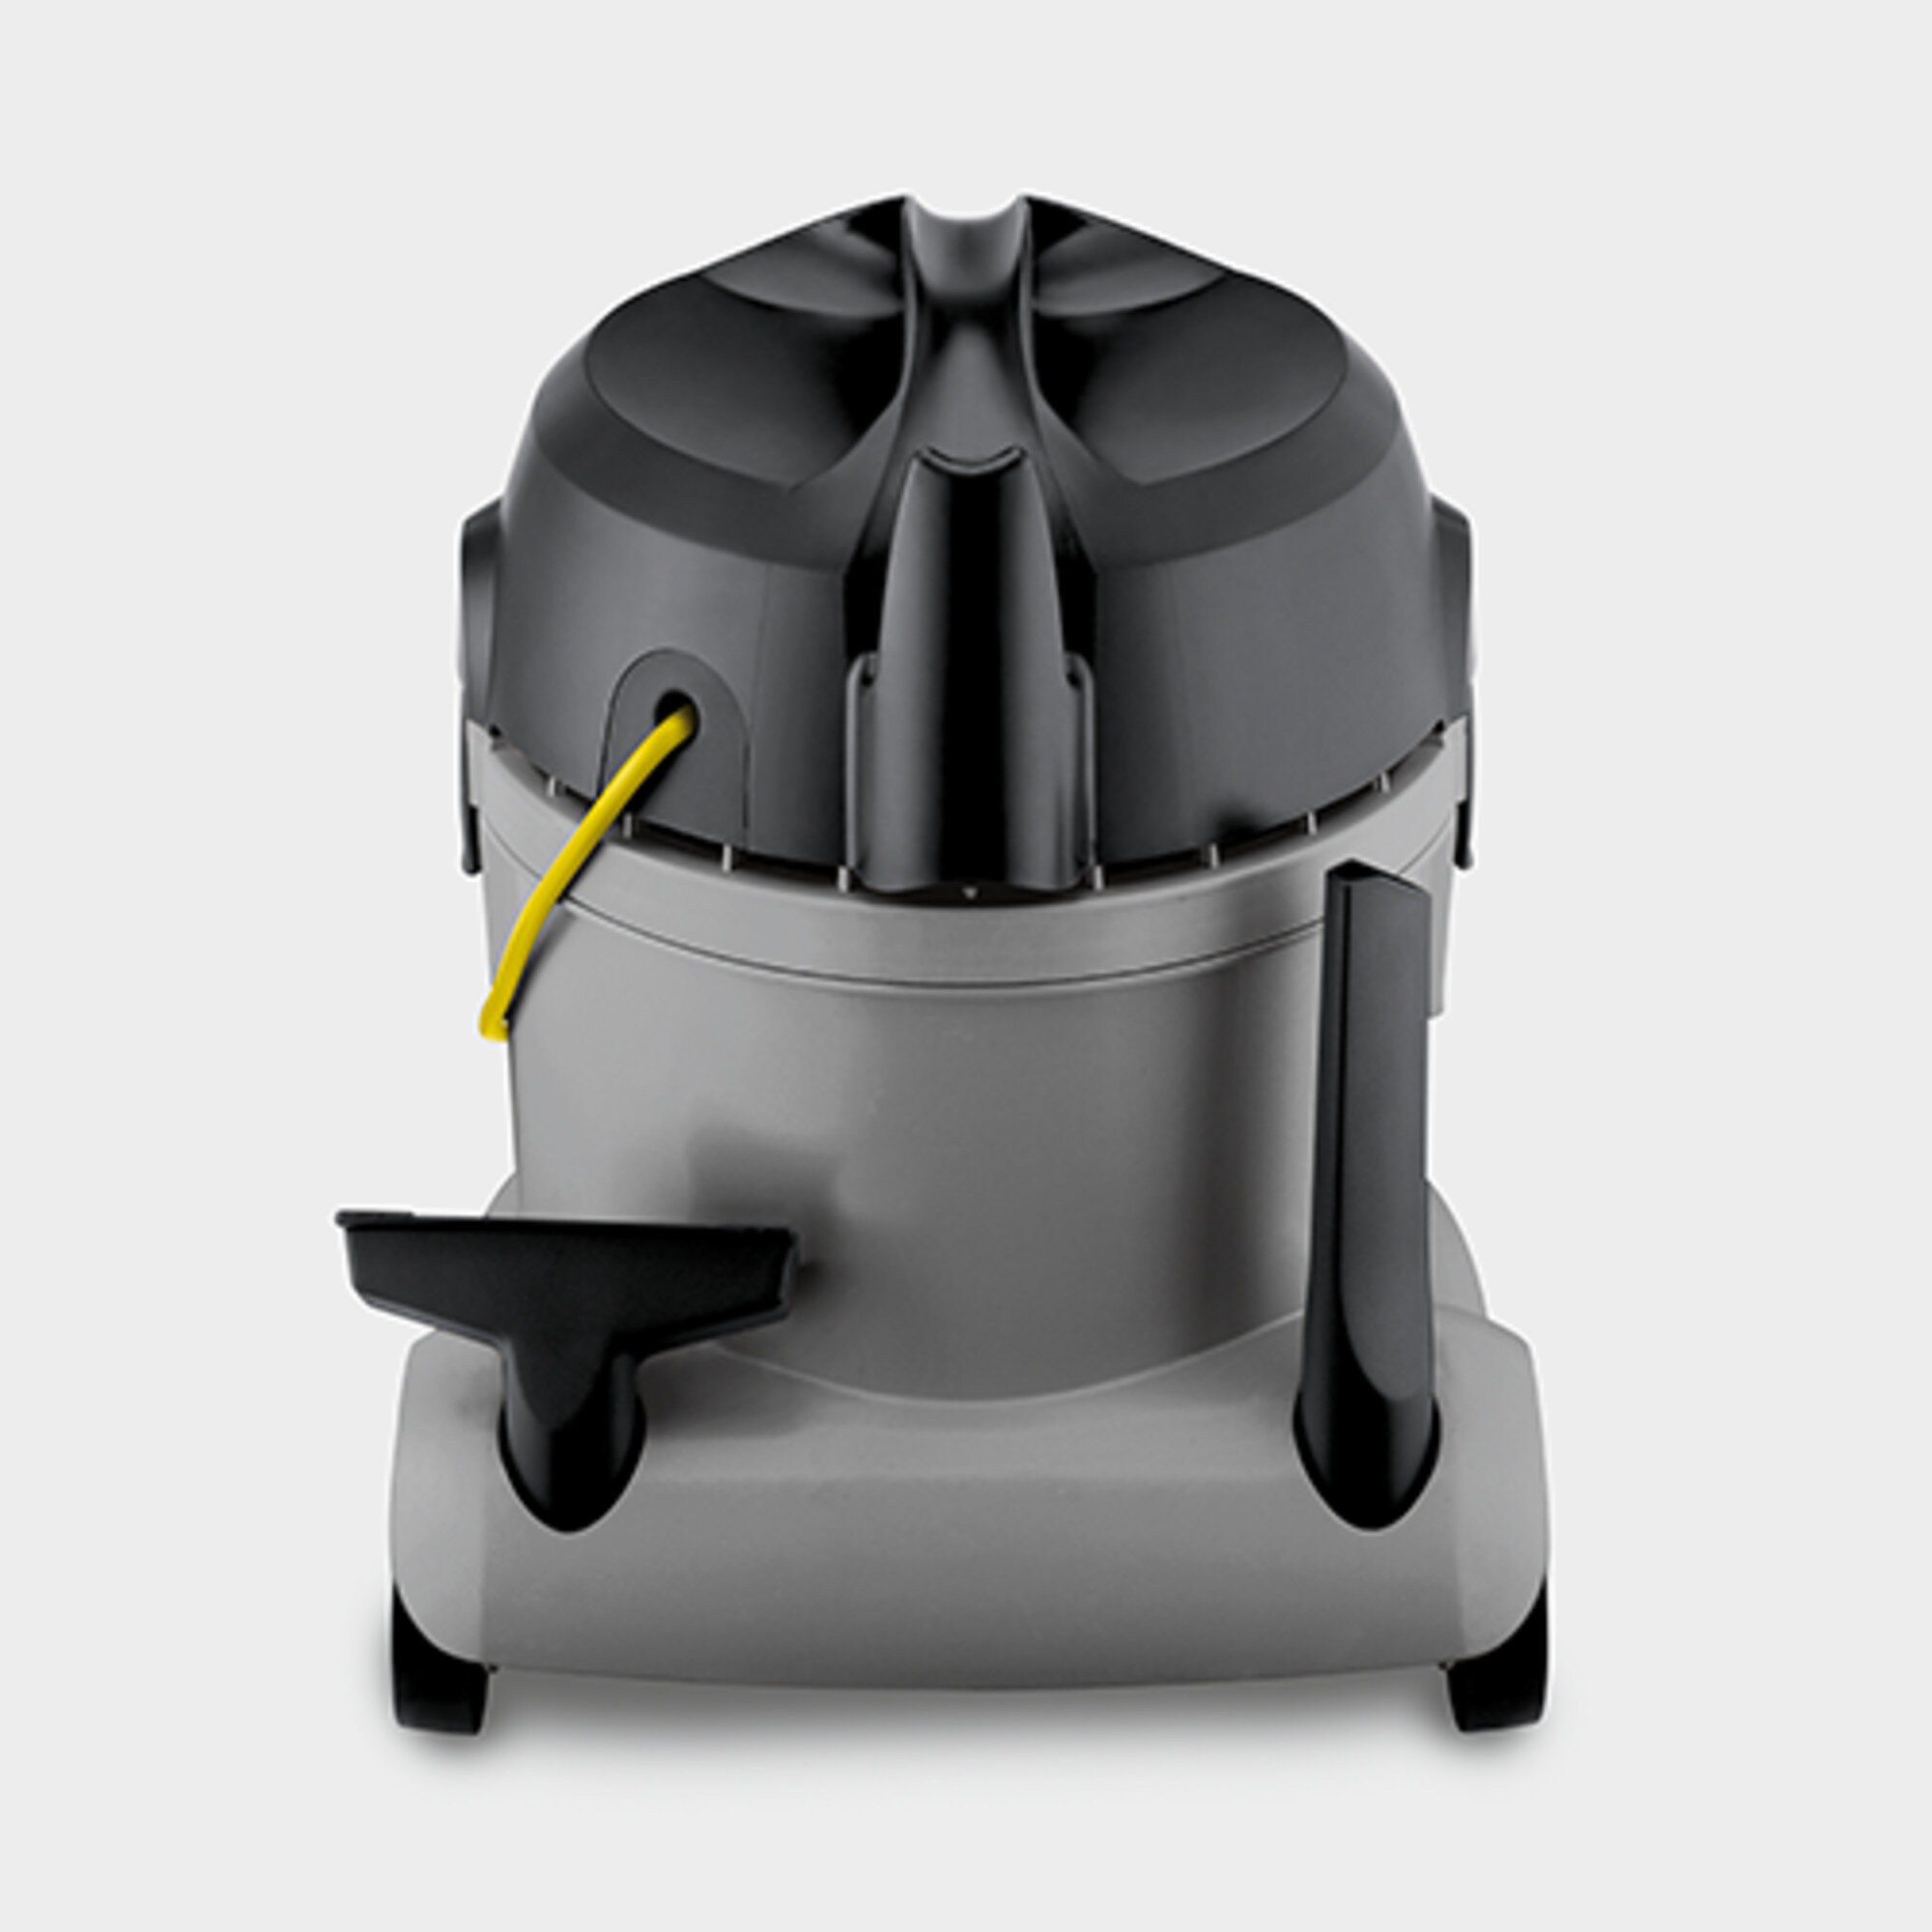 Dry vacuum cleaner T 10/1: On-board accessory storage